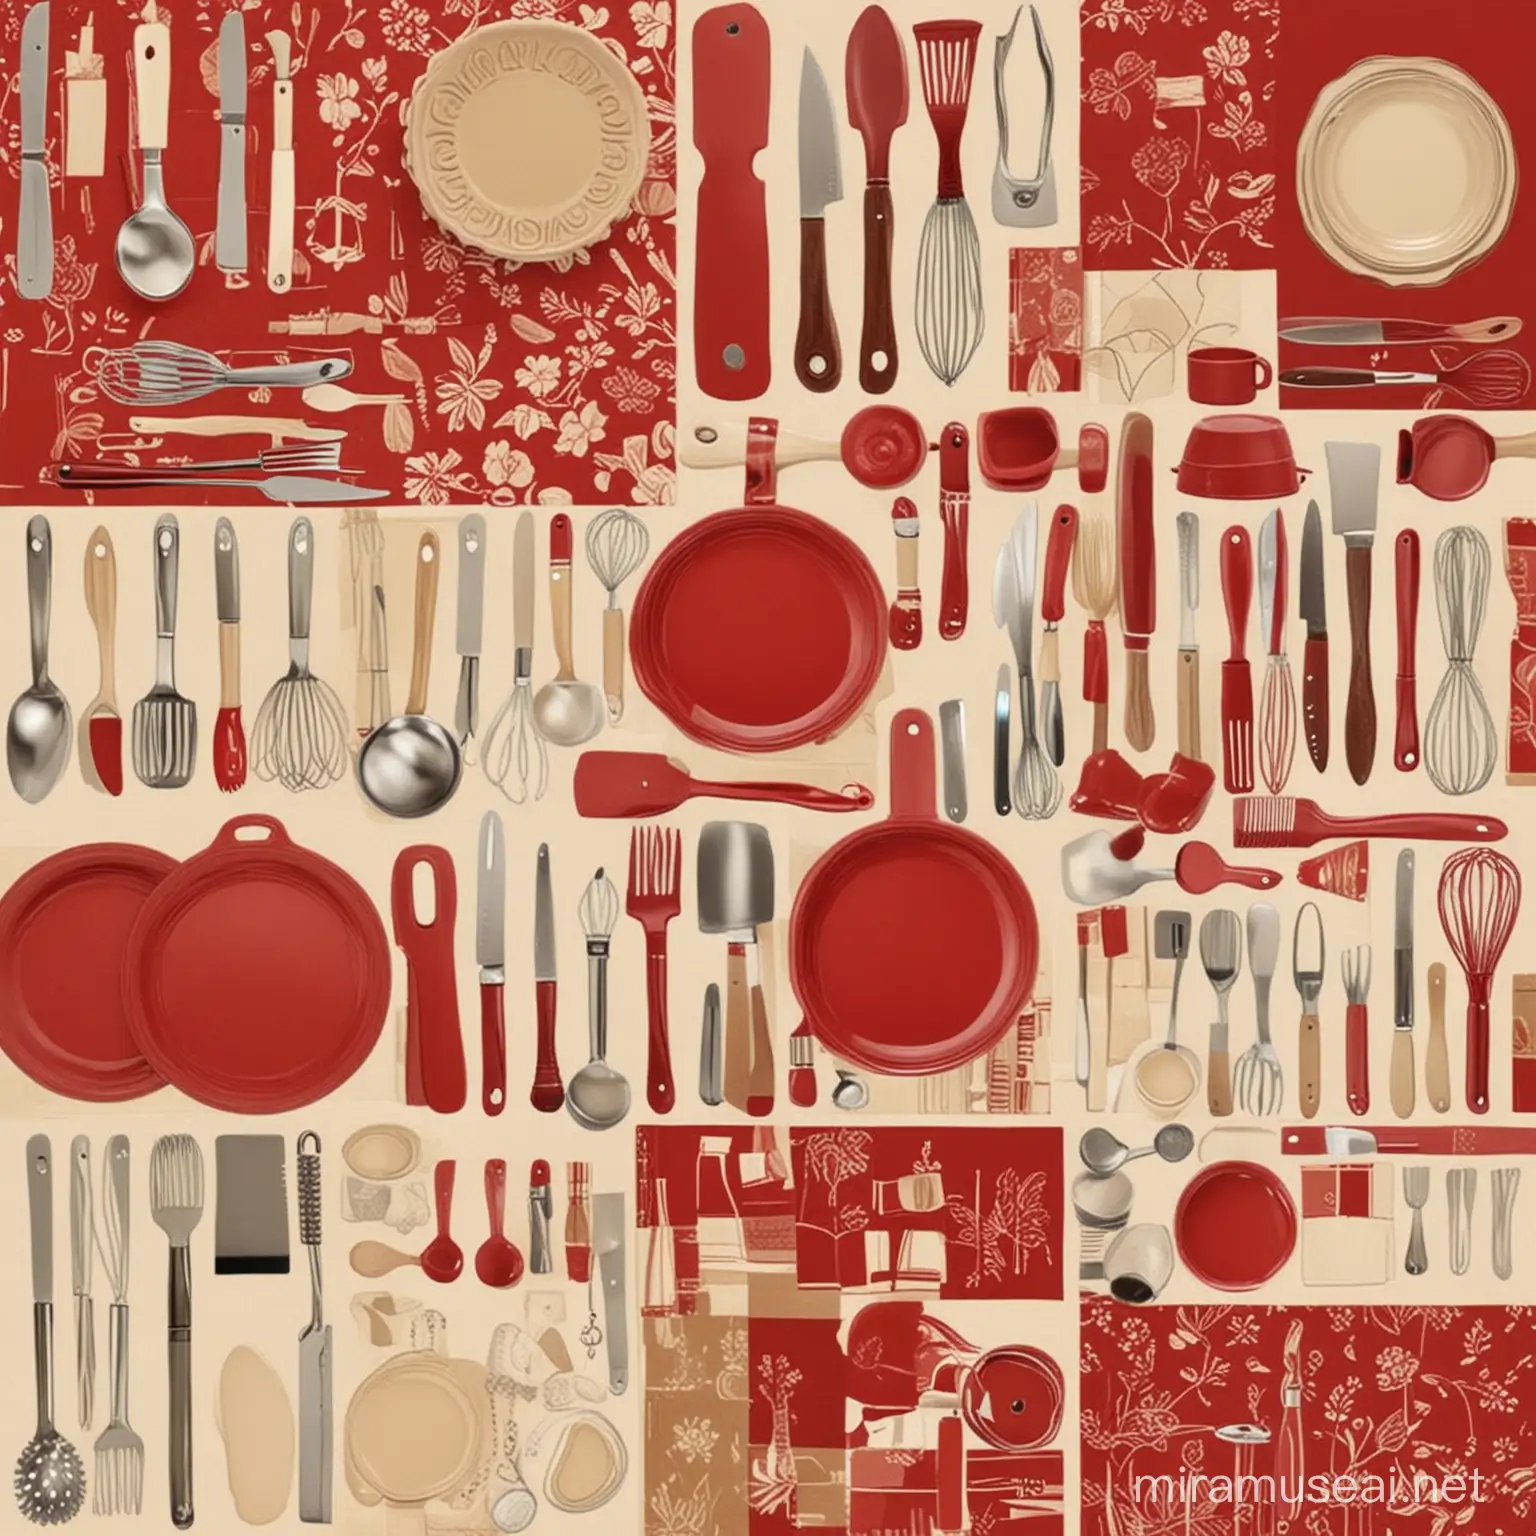 FamilyFriendly Kitchen Tools with Bold and Warm Color Scheme